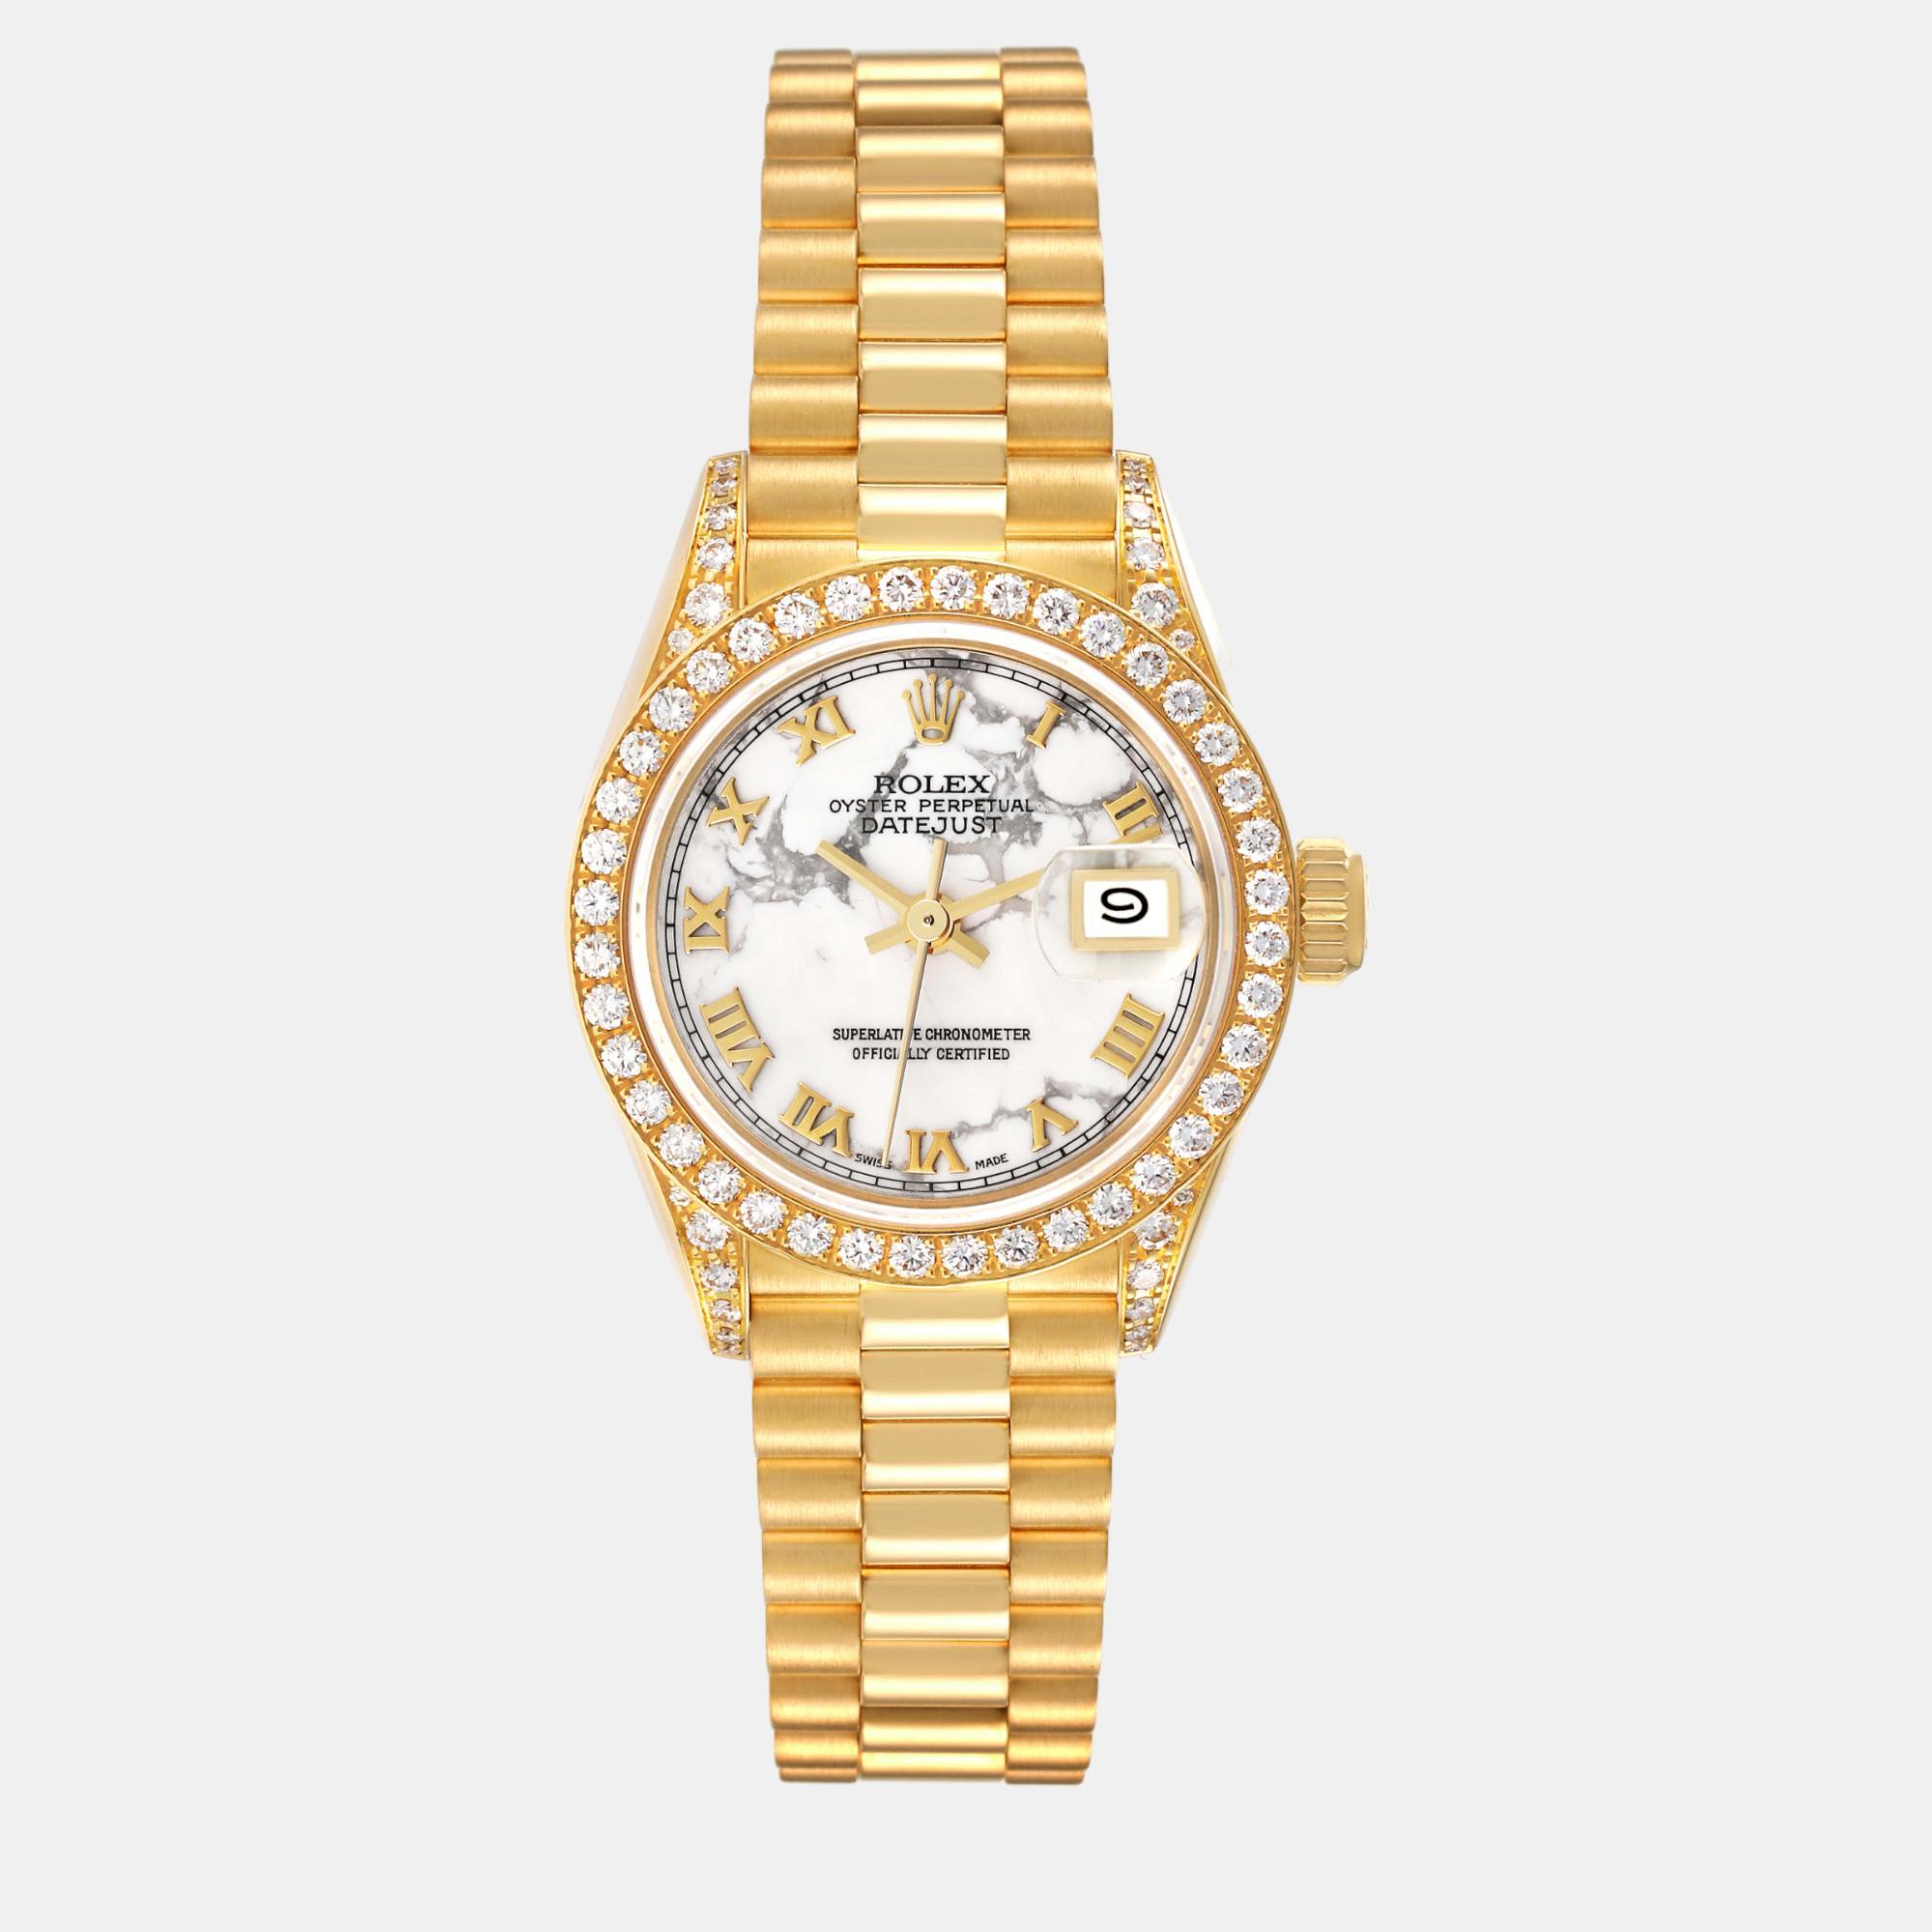 Rolex president datejust yellow gold marble dial diamond ladies watch 69158 26 mm